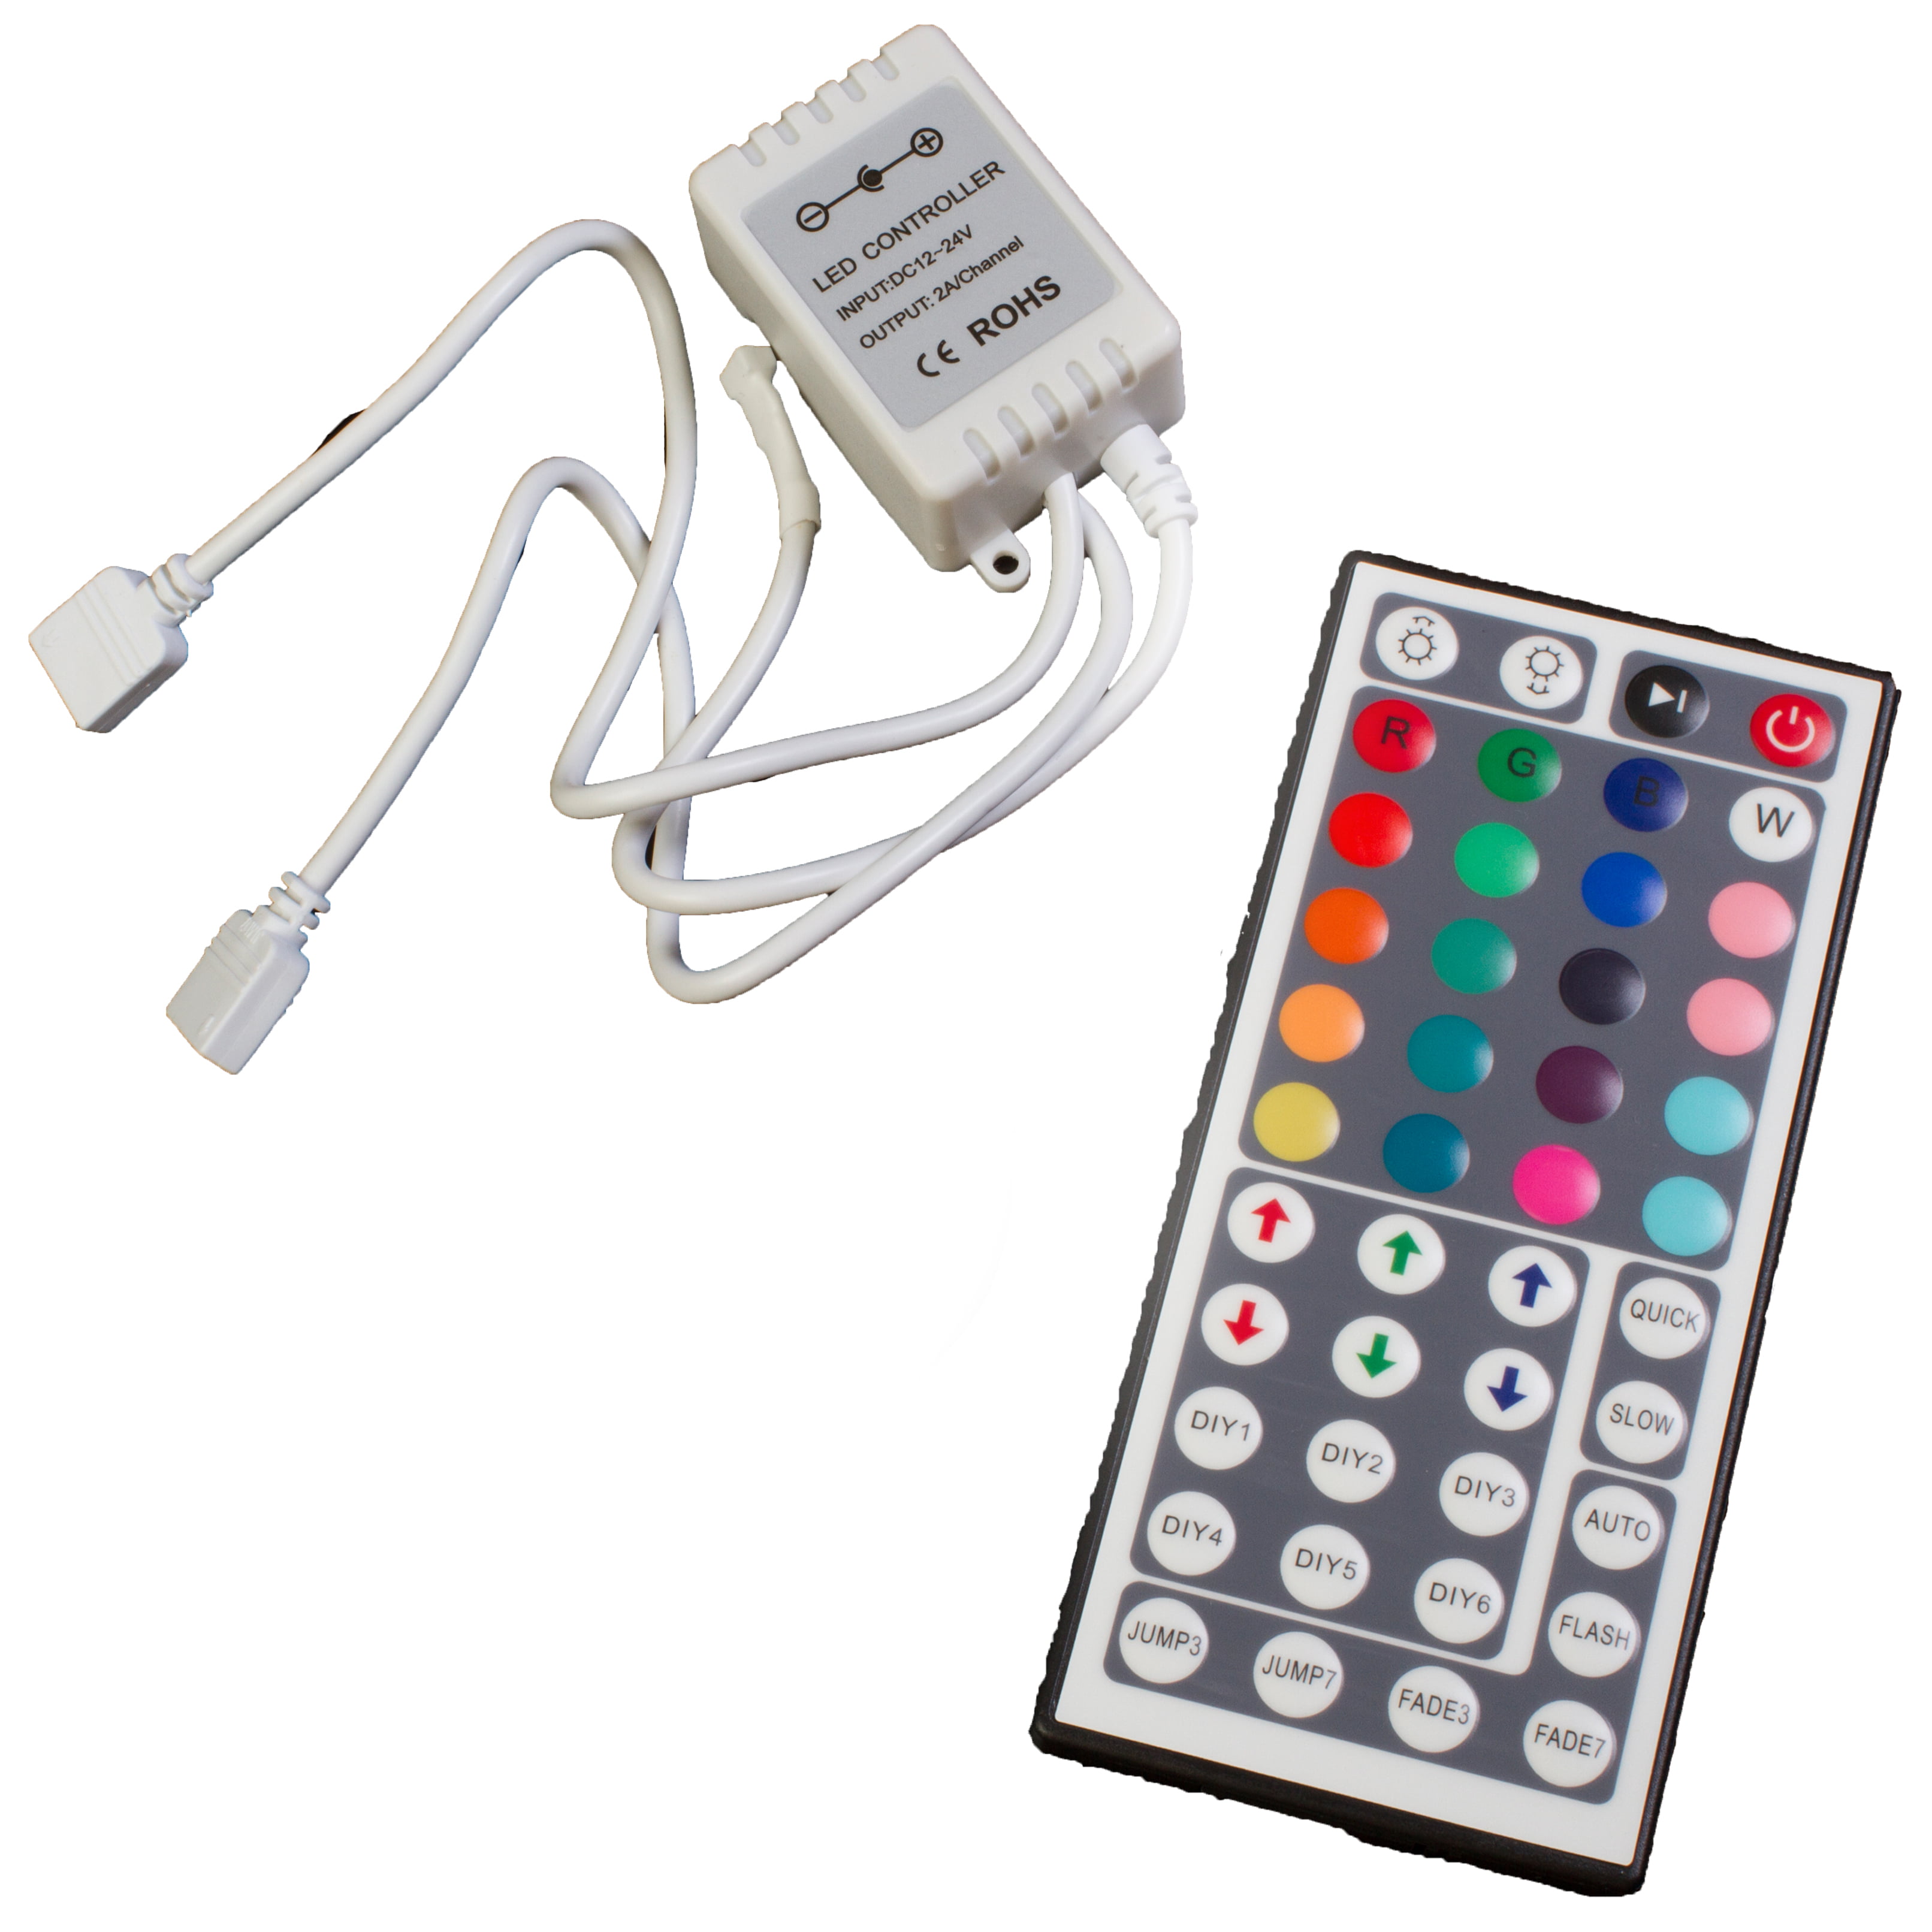 Details about   Clear Under Glow Tube Foot light Wireless IR Remote Control RGB LED Strip MBCD 